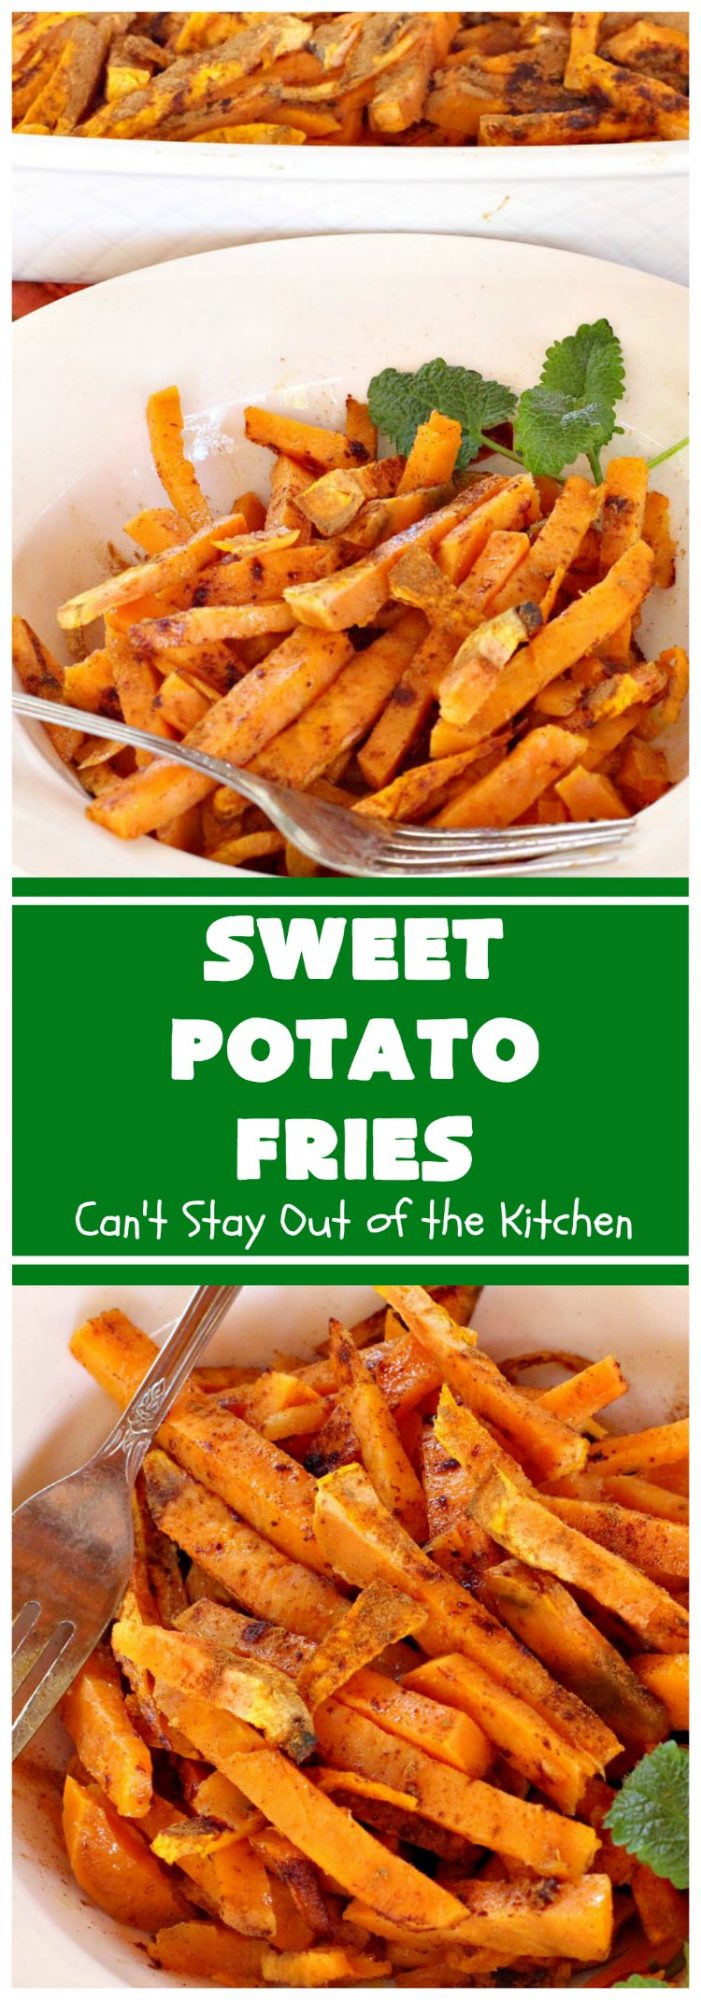 Sweet Potato Fries – Can't Stay Out of the Kitchen